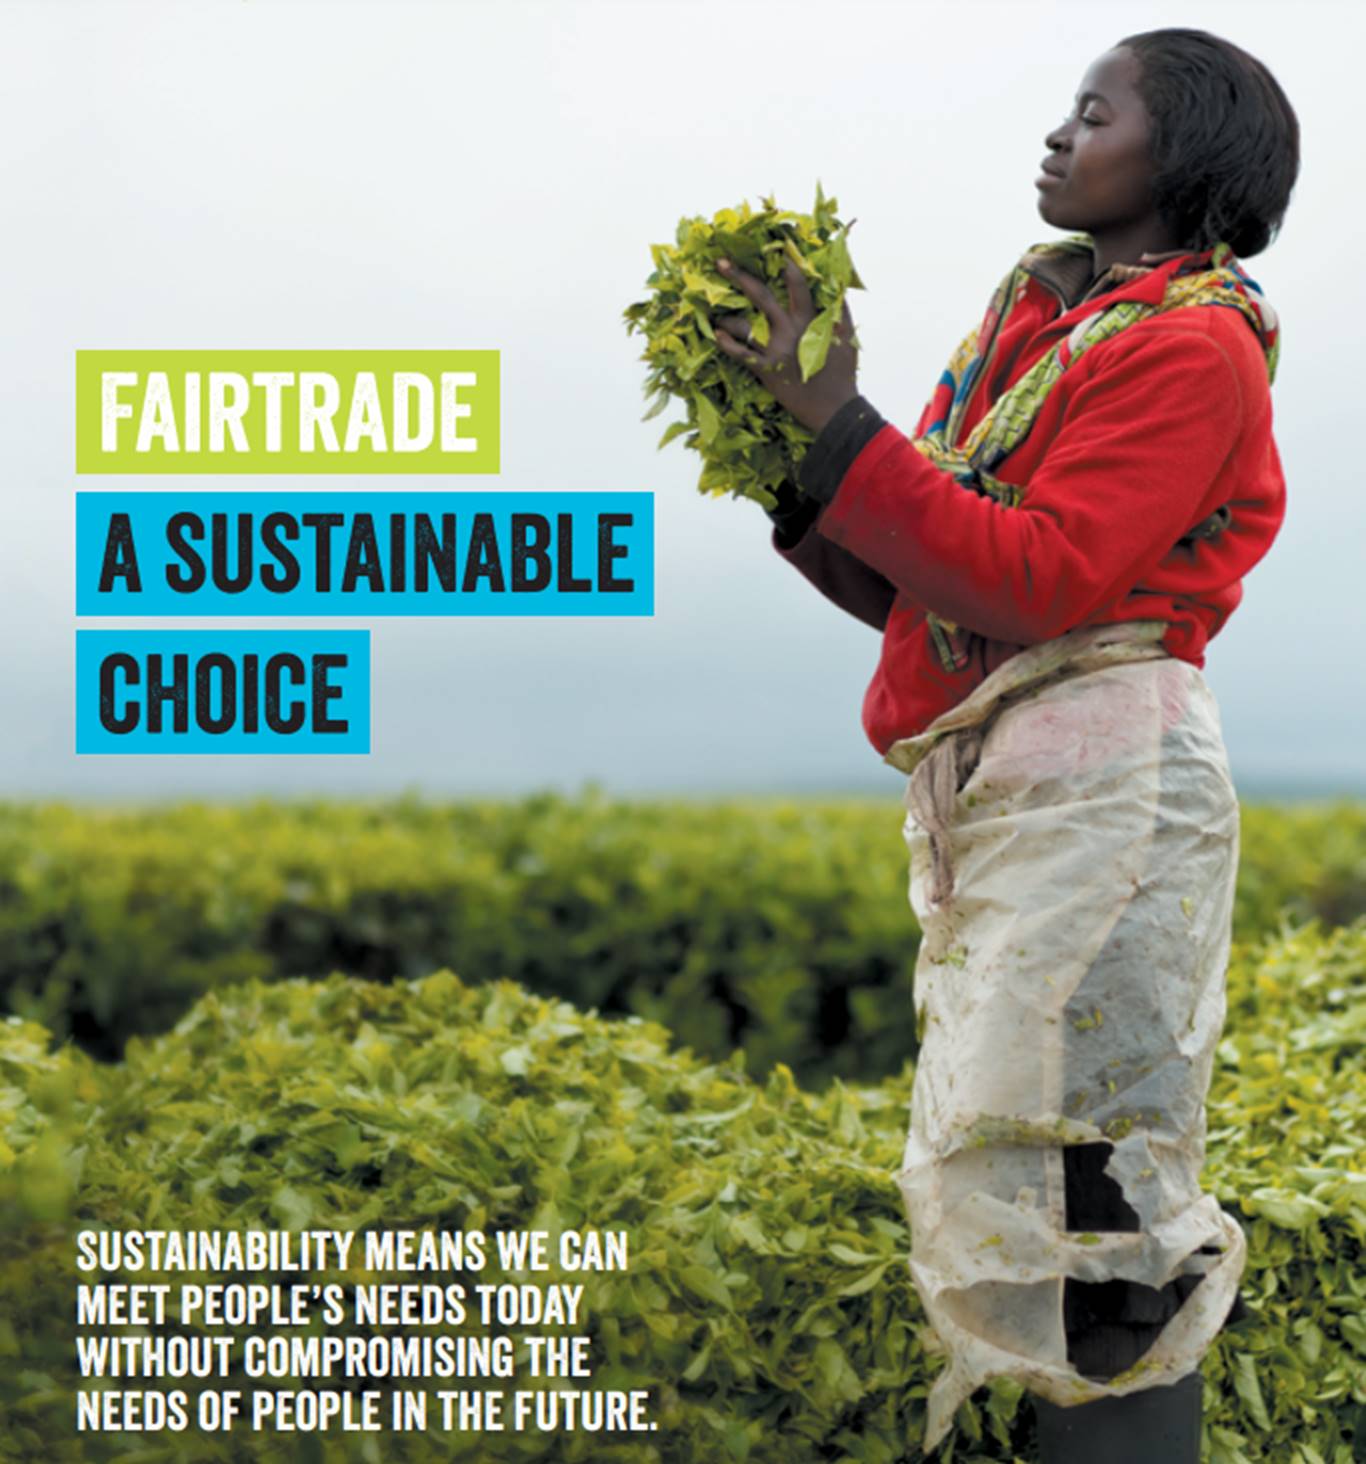 Graphic imahe of a person holding some fairtrade crops